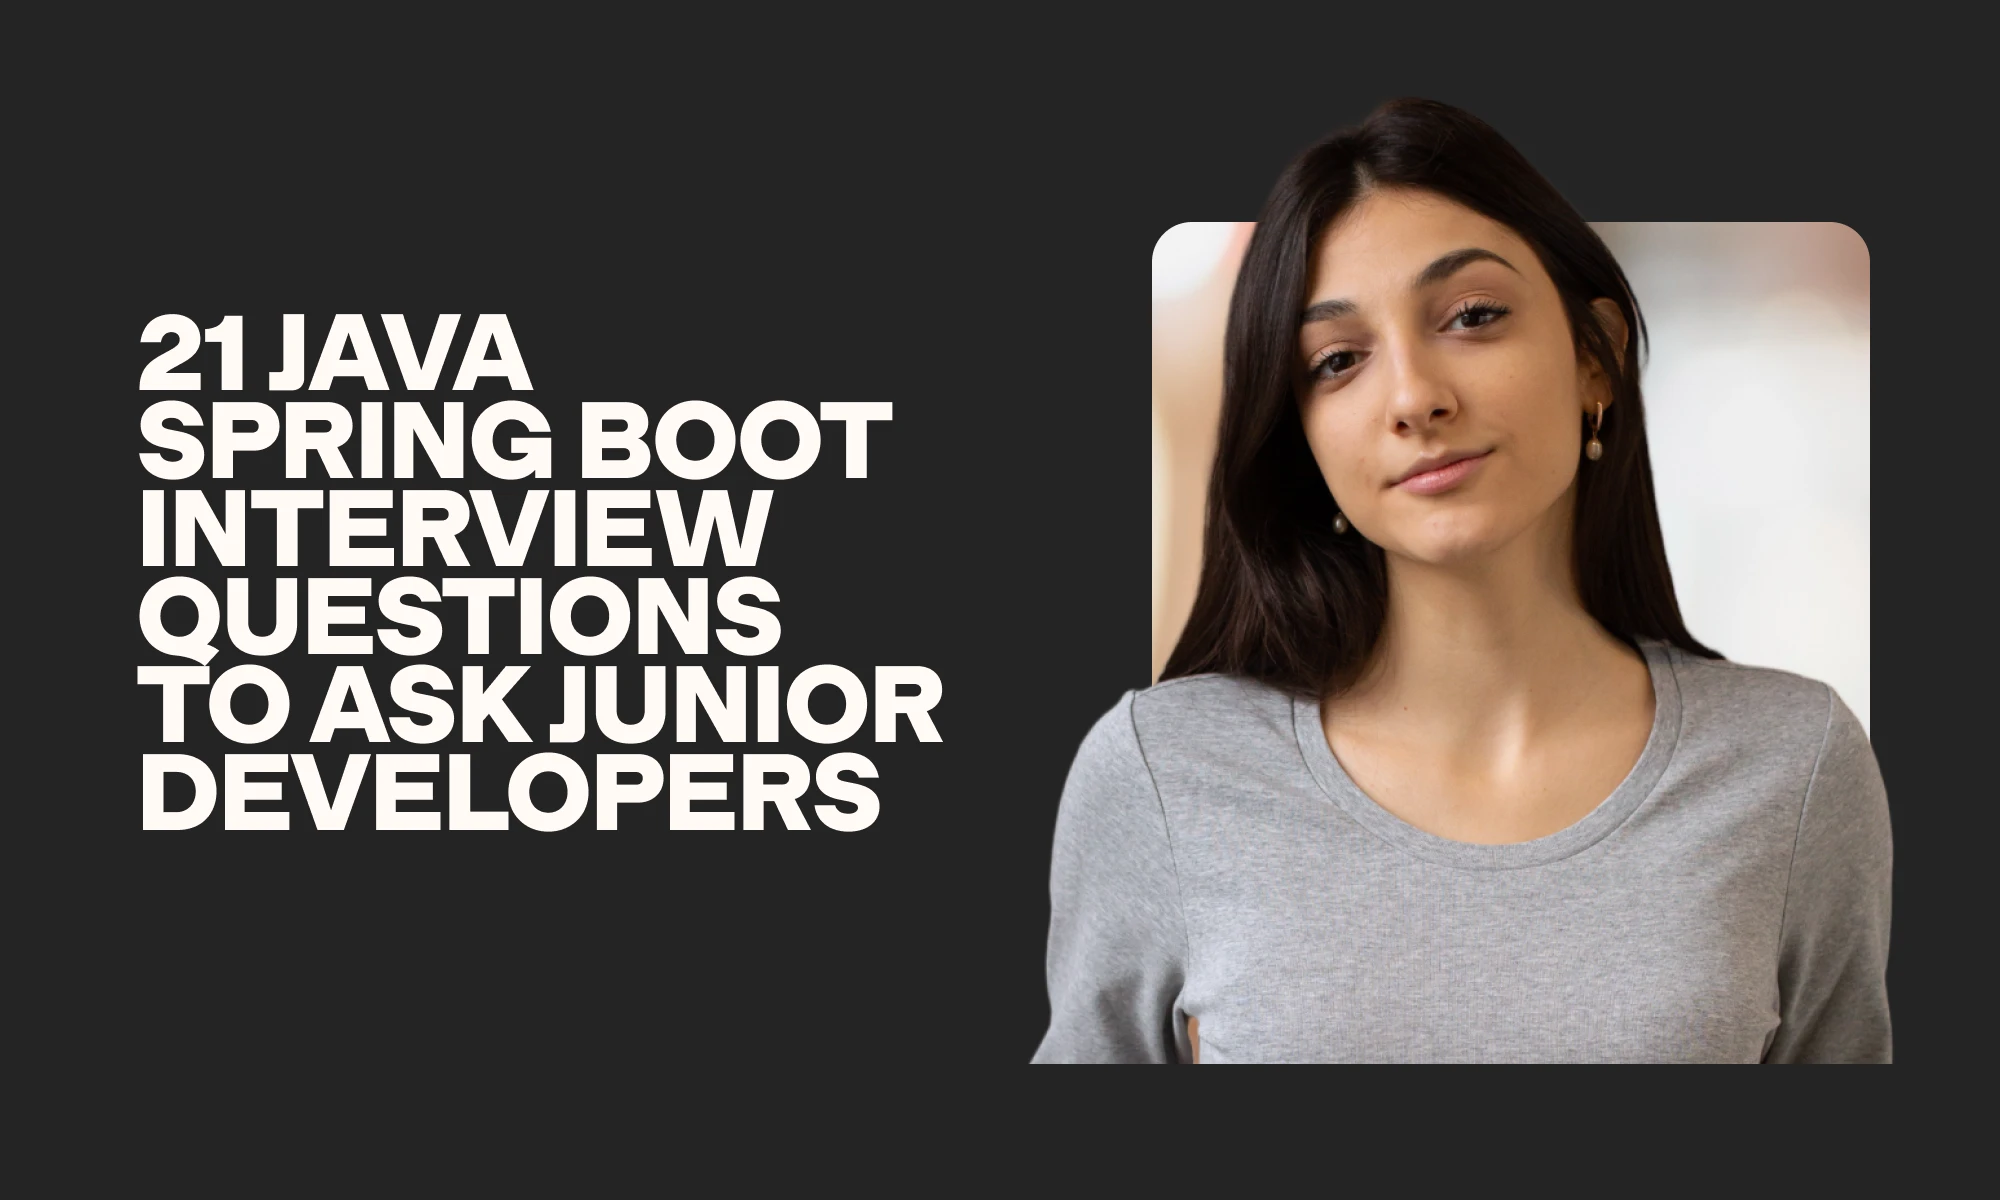 21 Java Spring Boot interview questions to ask junior developers